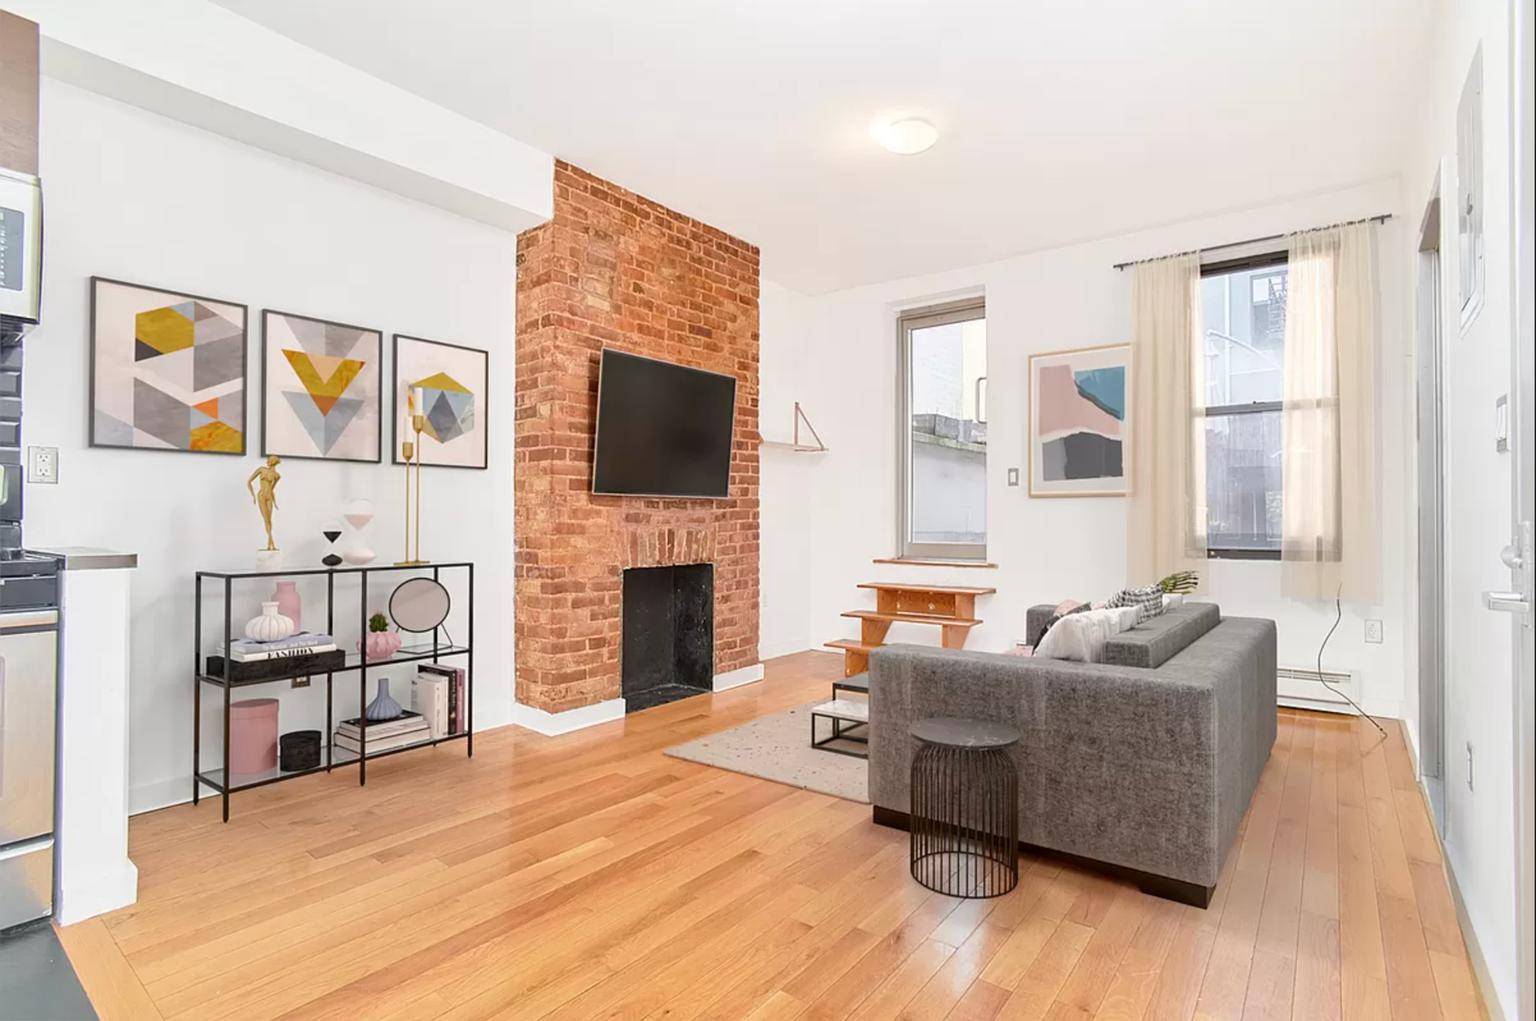 Rare Two Bedroom Apartment with HUGE Deck in the Heart of WilliamsburgAvailable for a May 2 15 Lease Start Date OnlyApartment Features Big Private Deck Stainless Steel Appliances Dishwasher and ...